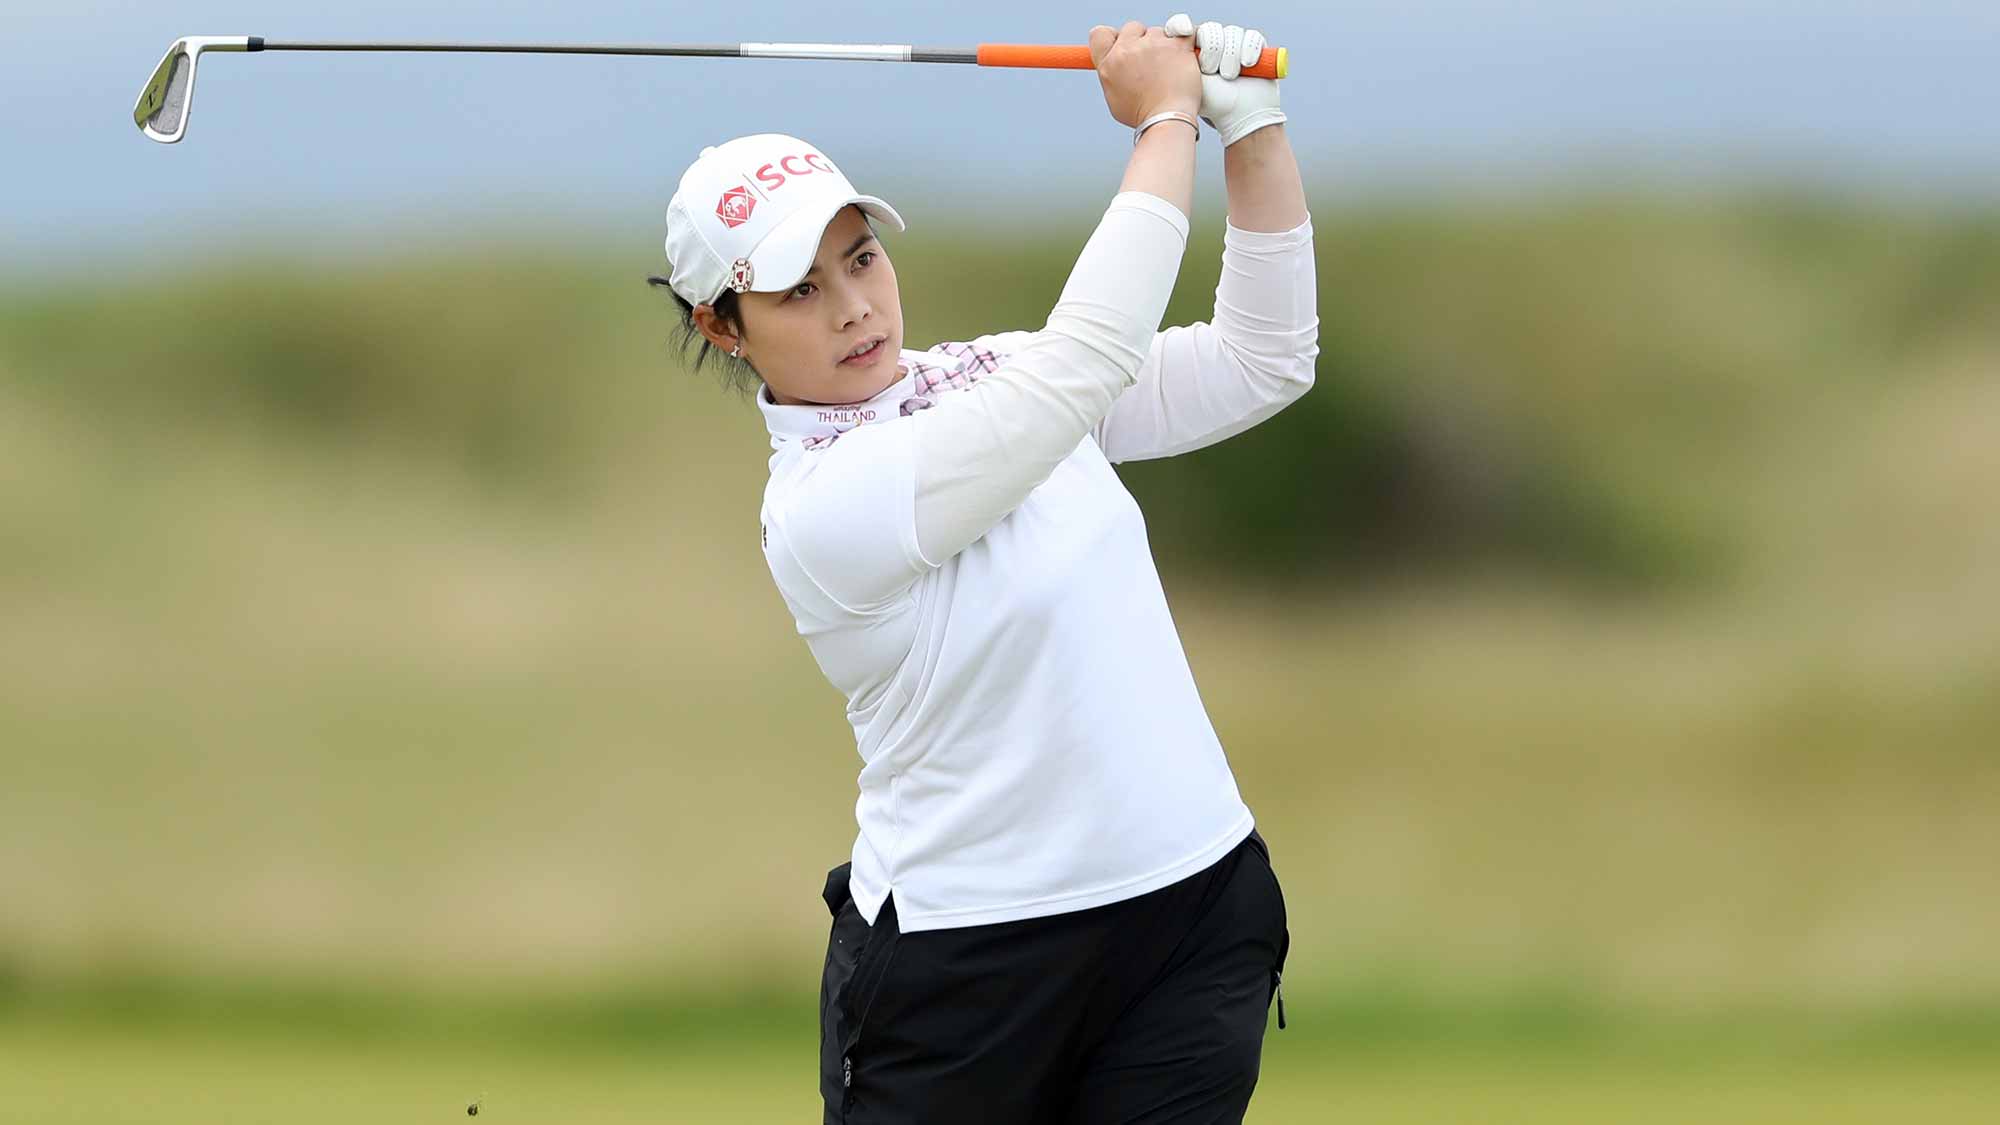 Moriya Jutanugarn of Thailand hits her second shot on the 3rd hole during the final round of the Ricoh Women's British Open at Kingsbarns Golf Links